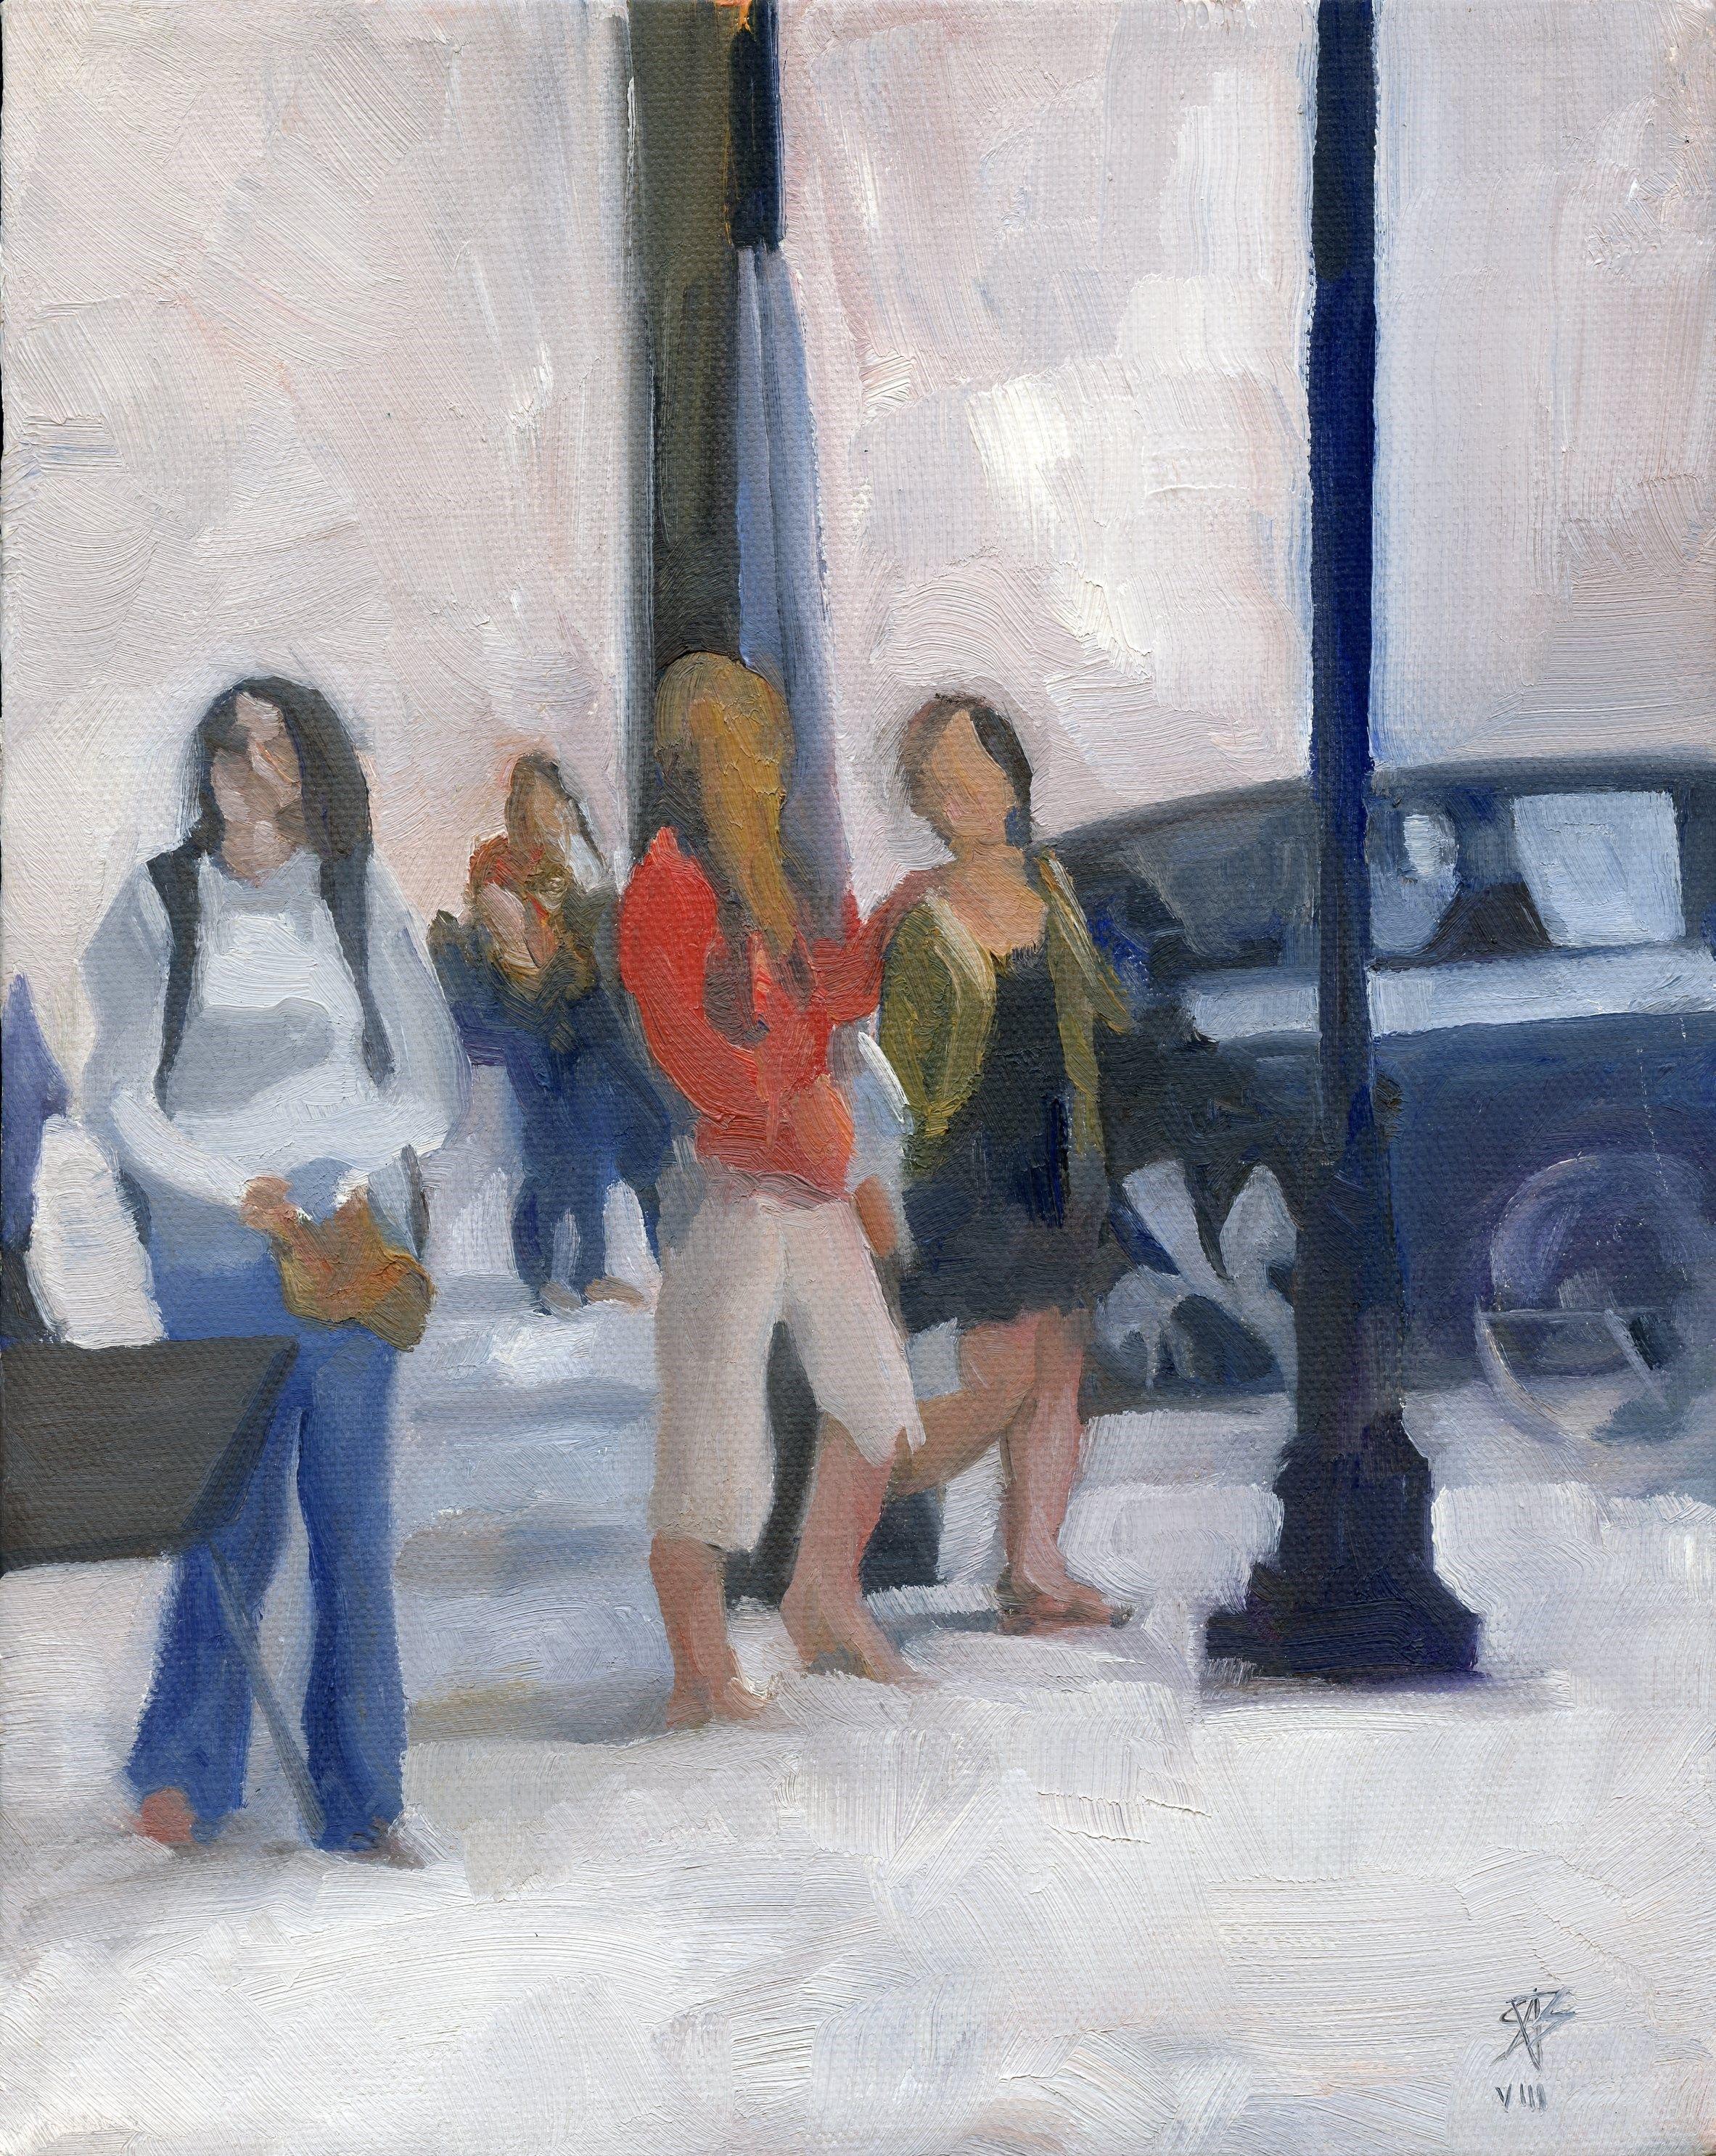 This is an atmospheric view of people walking near the campus of the University of Pittsburgh. The bright red jacket acts as a focal point in a largely monochromatic environment. :: Painting :: Contemporary :: This piece comes with an official